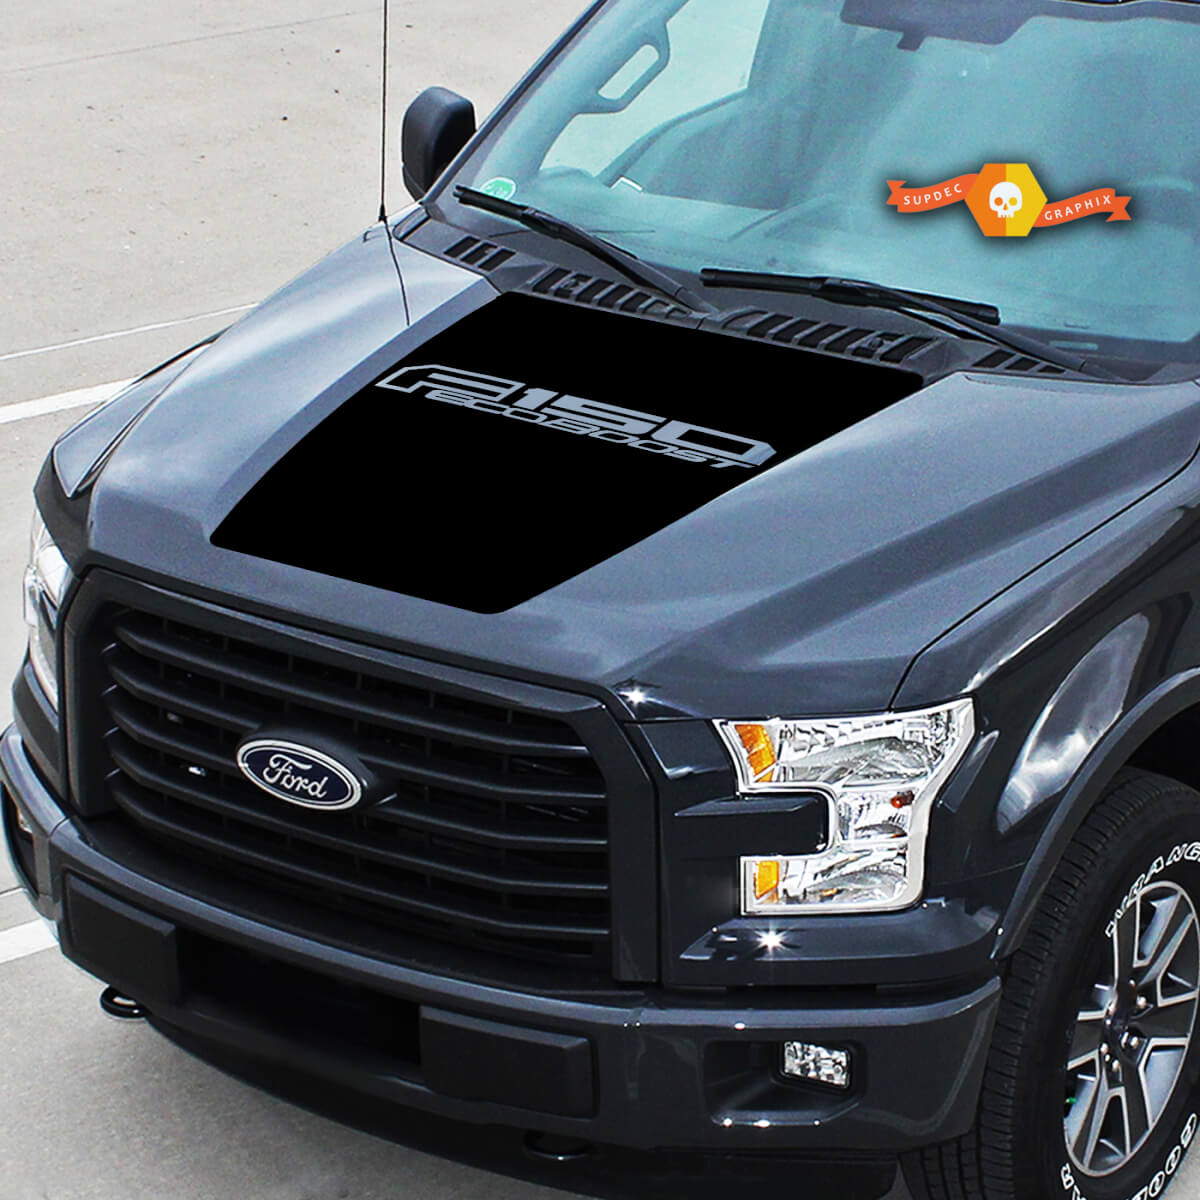 Fits Ford F-150 Center Logo EcoBoost Center Hood Graphics Stripes Vinyl Decals Truck Stickers 15-20